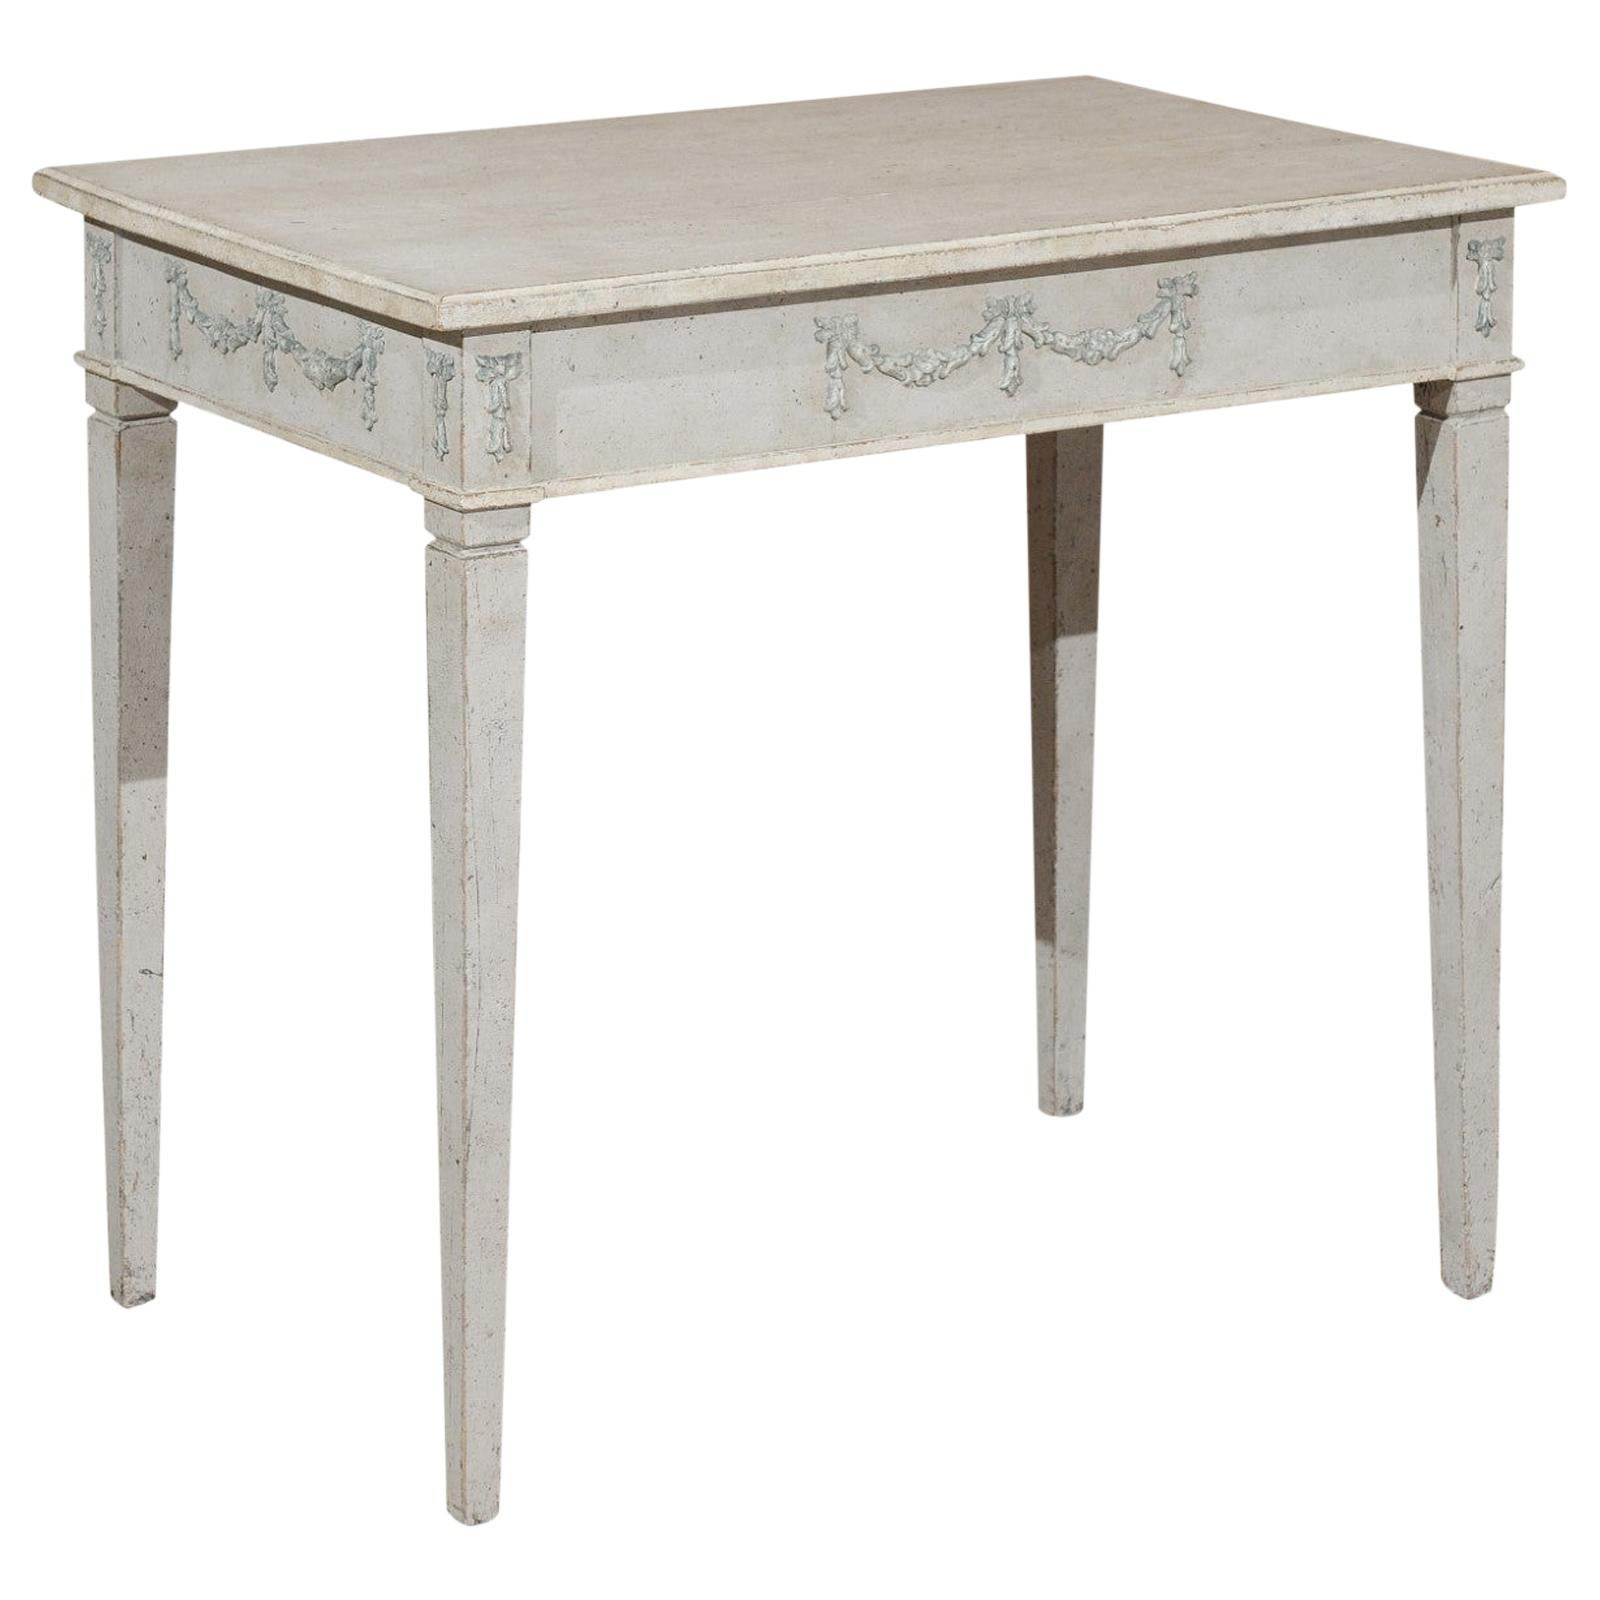 Swedish Gustavian Style 19th Century Painted Table with Carved Campanula Swags